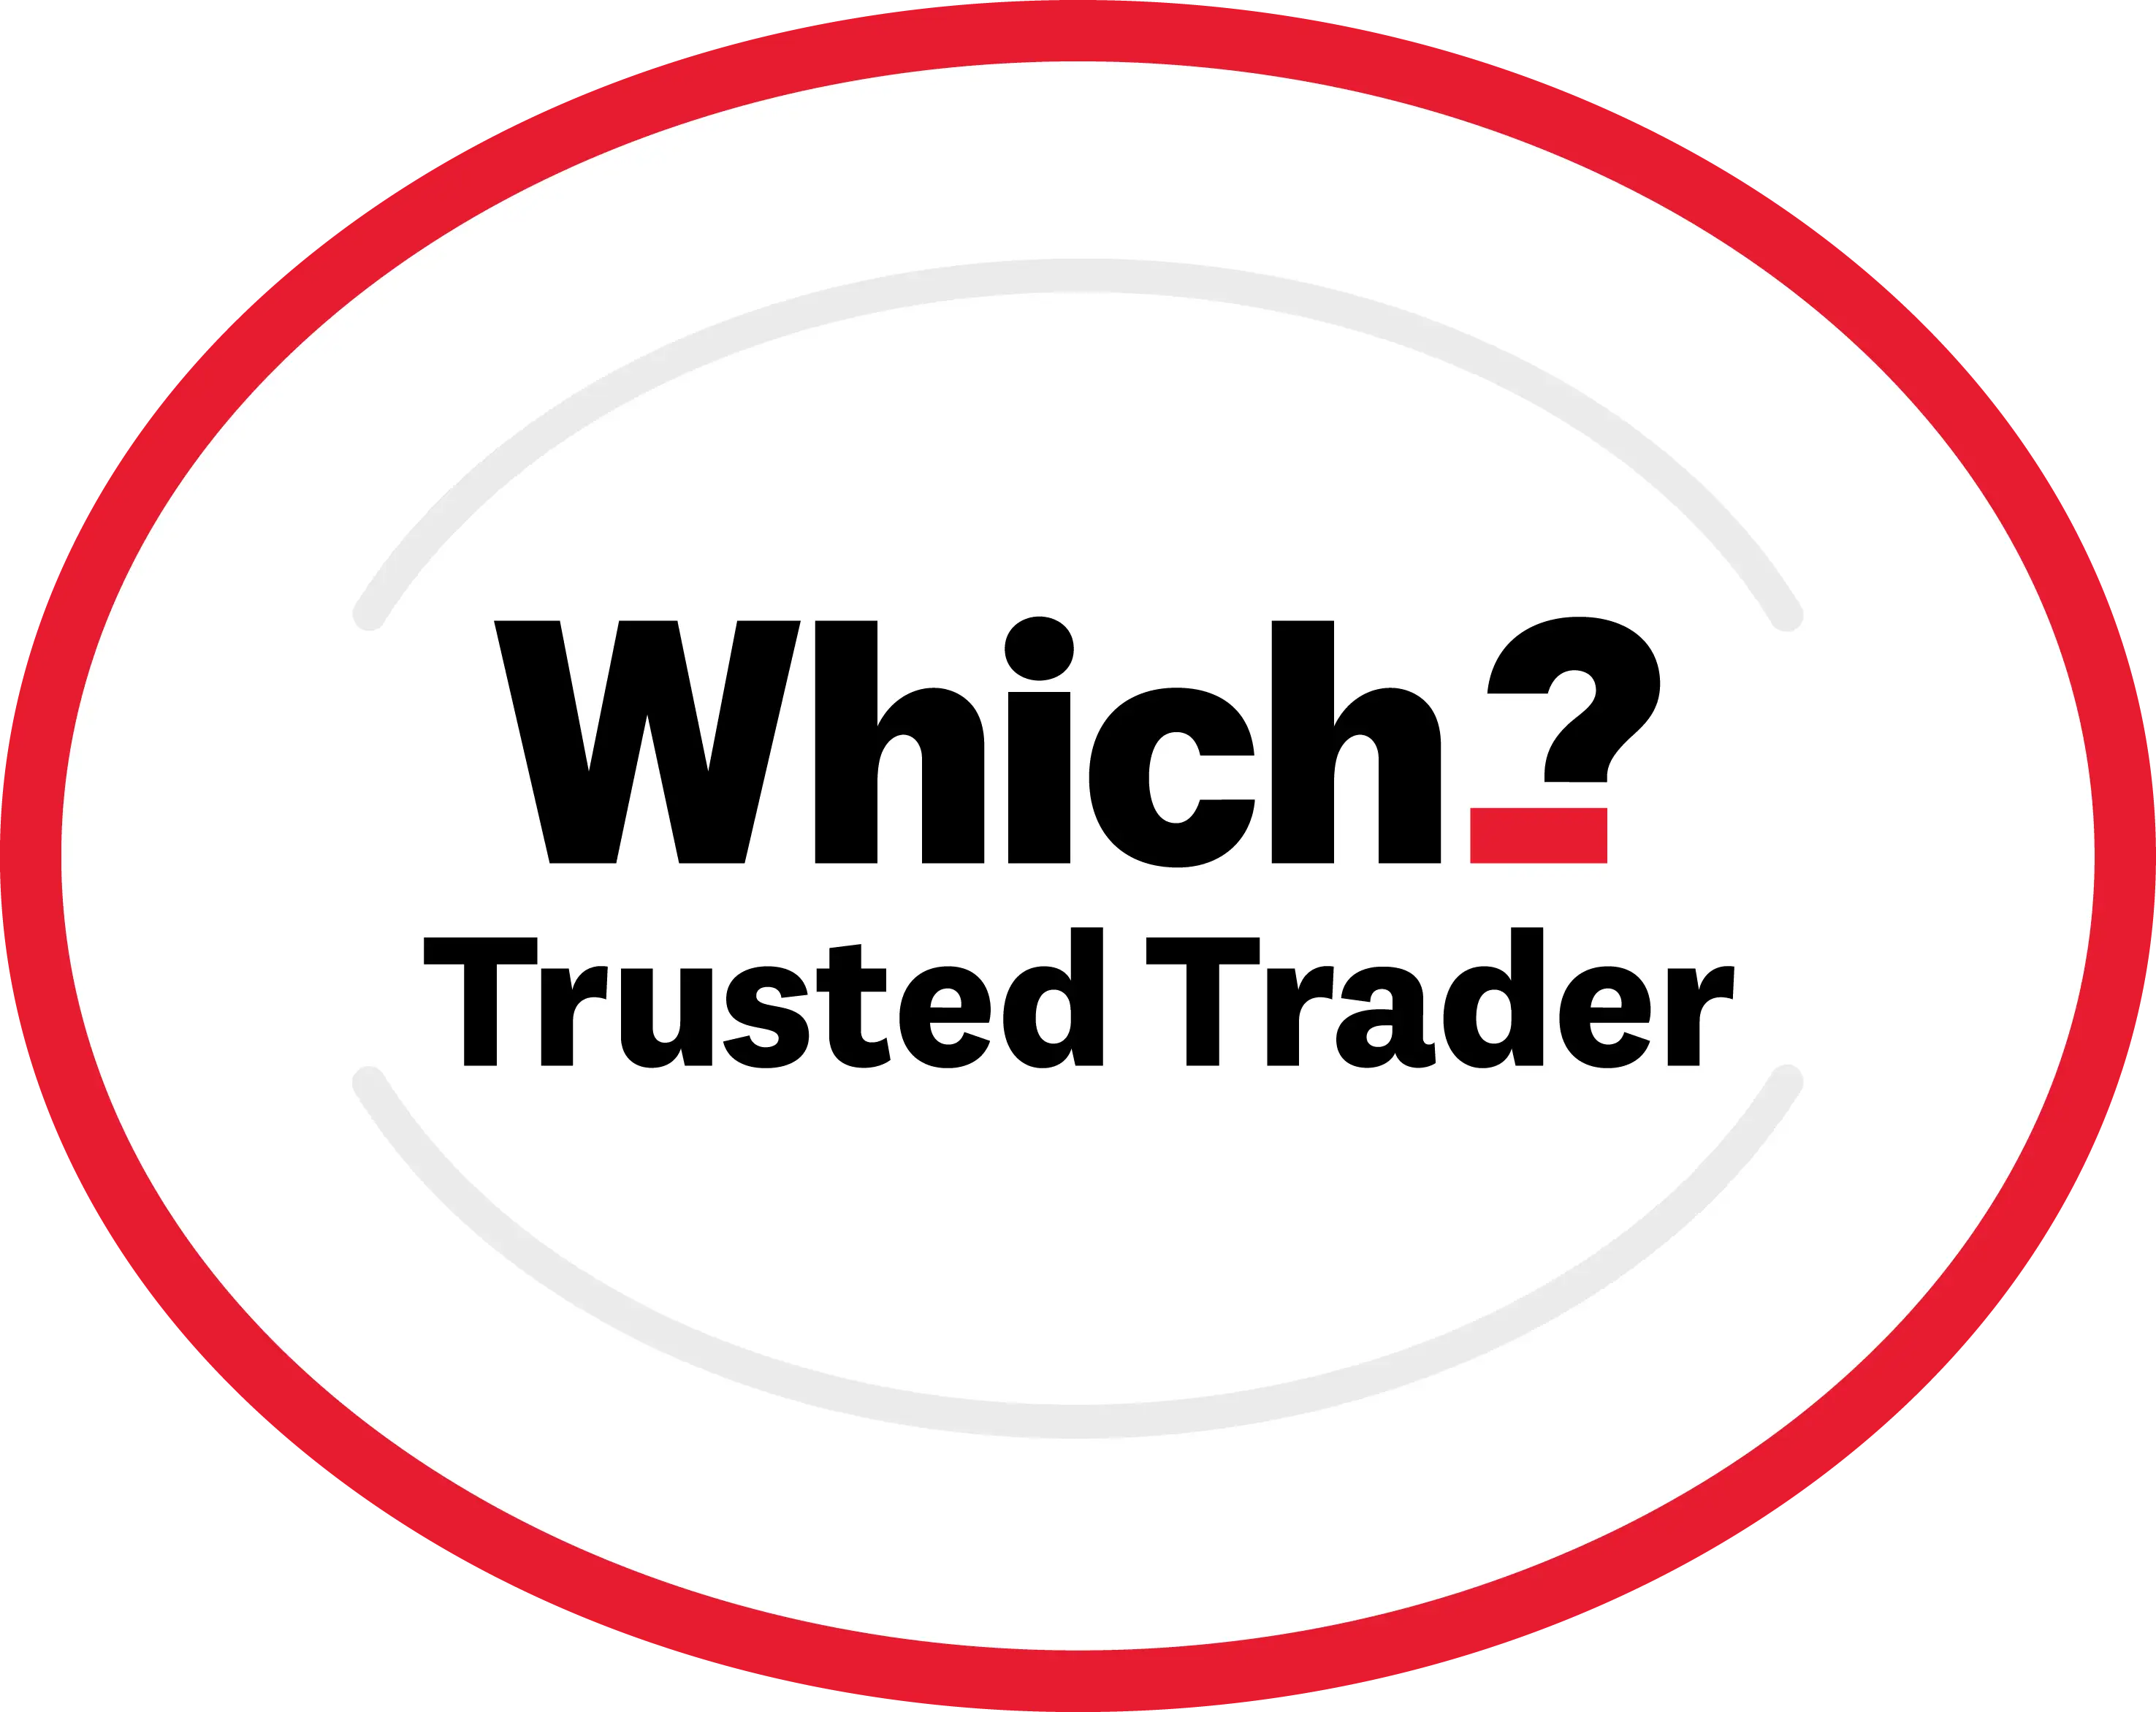 Which Trusted Trader for Kitchens in Newcastle